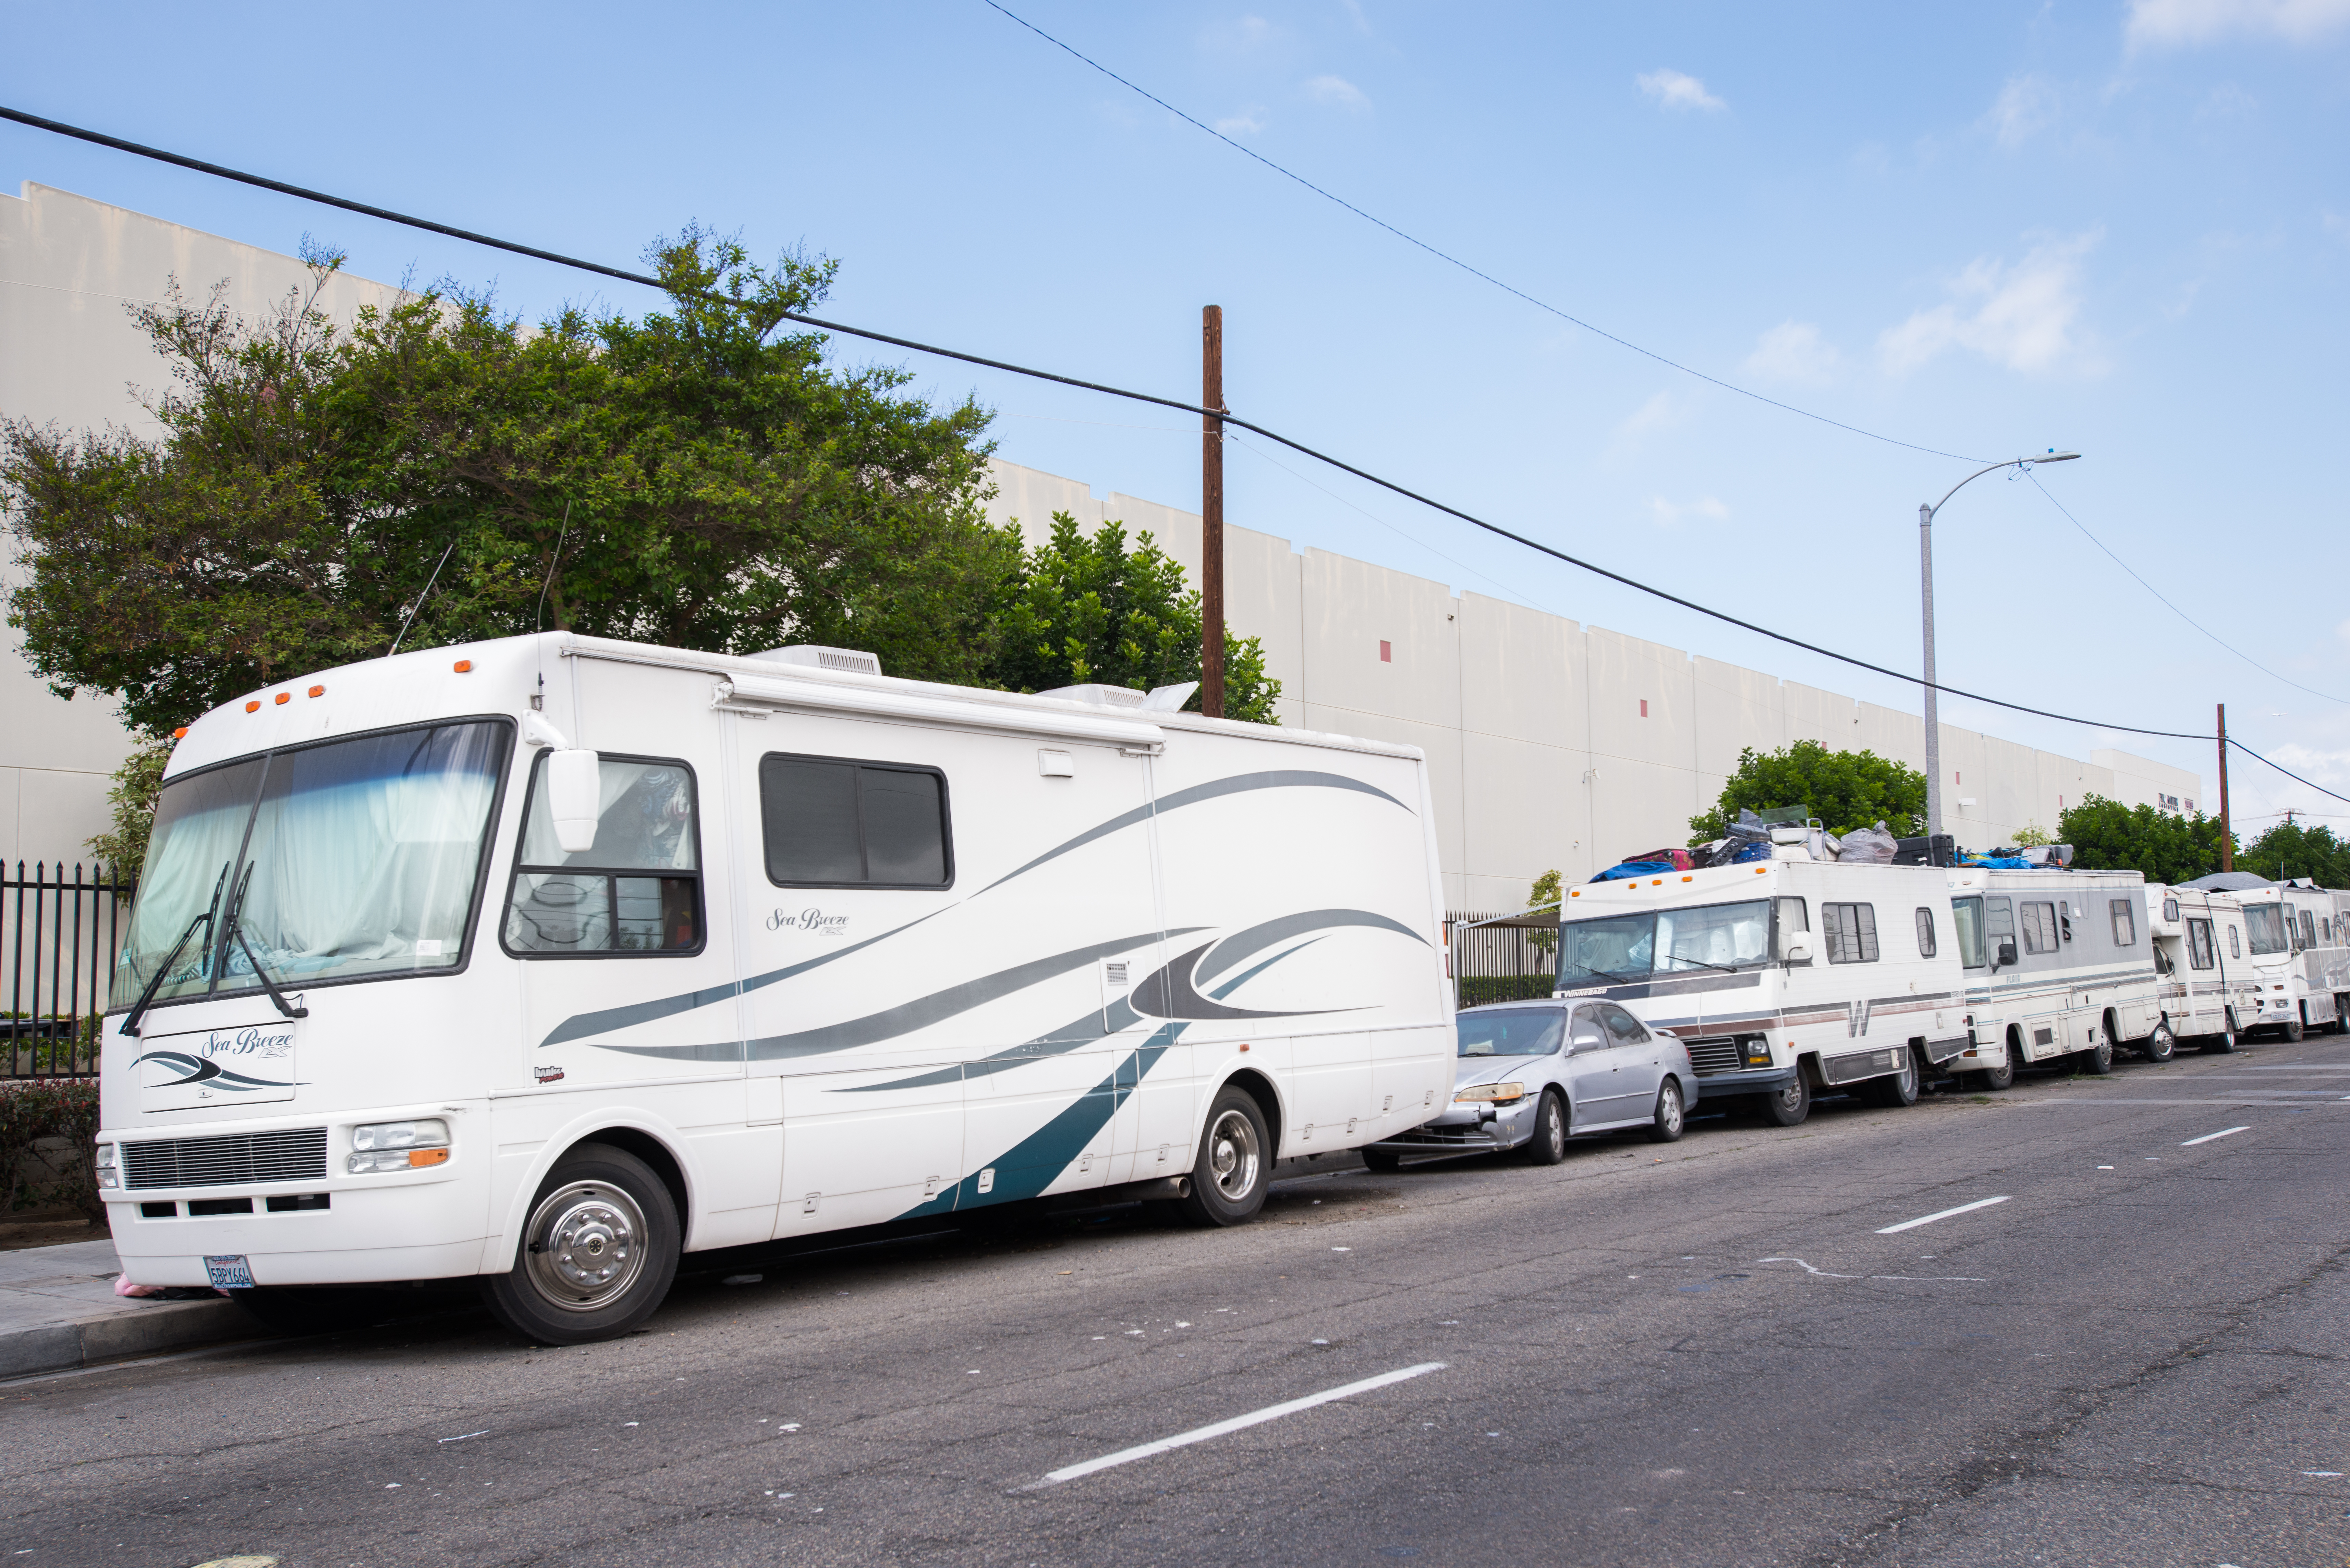 A photo shows parked RVs being used as homeless encampments along a sidewalk.